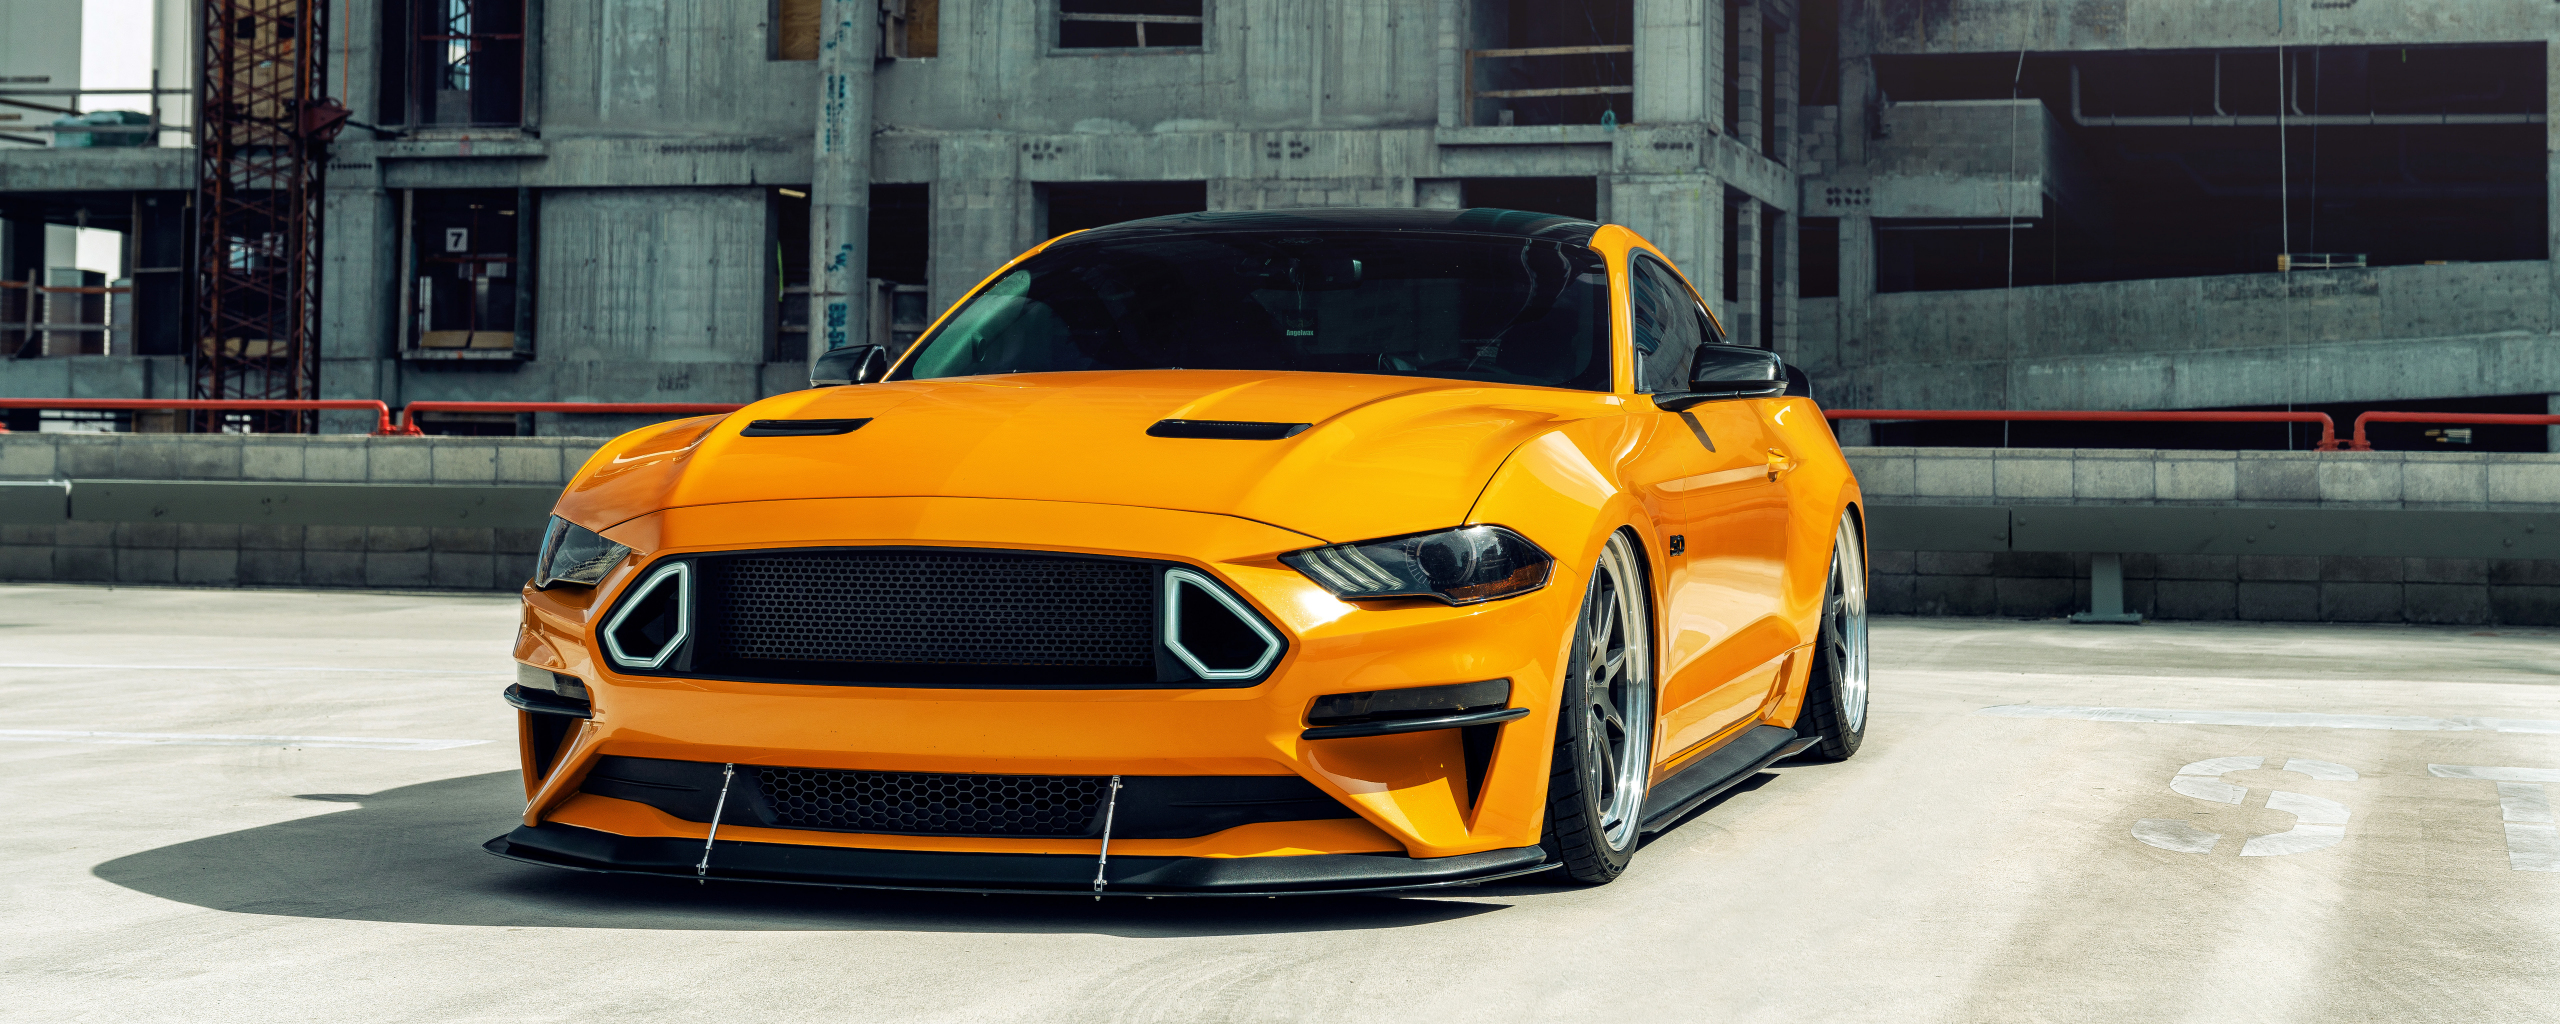 Yellow Ford Mustang GT, 2020, 2560x1024 wallpaper